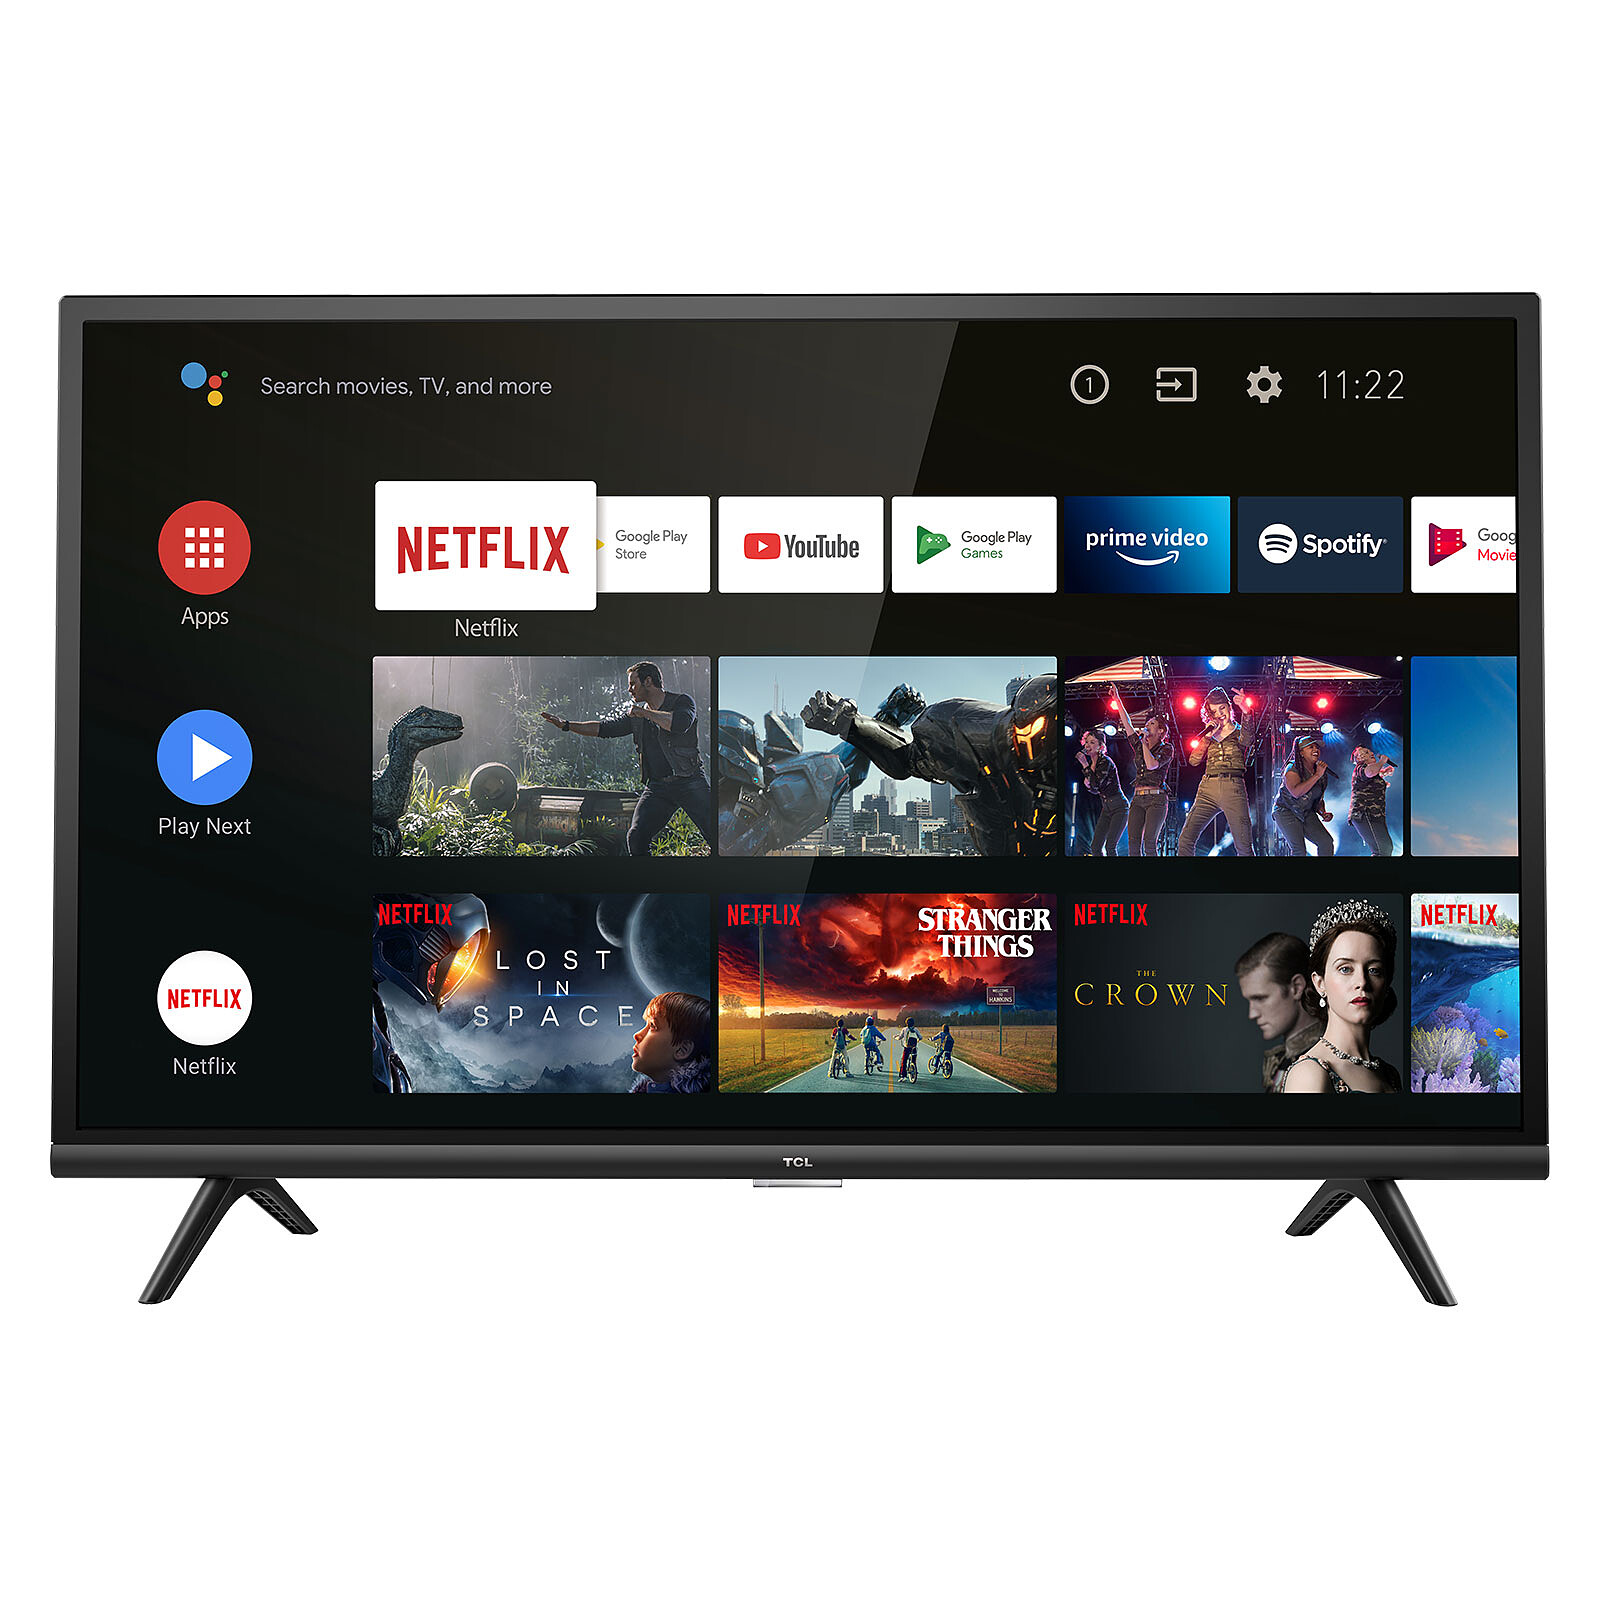 LED 32 TCL 32S5400AF Full HD Smart TV Android — TCL.cl